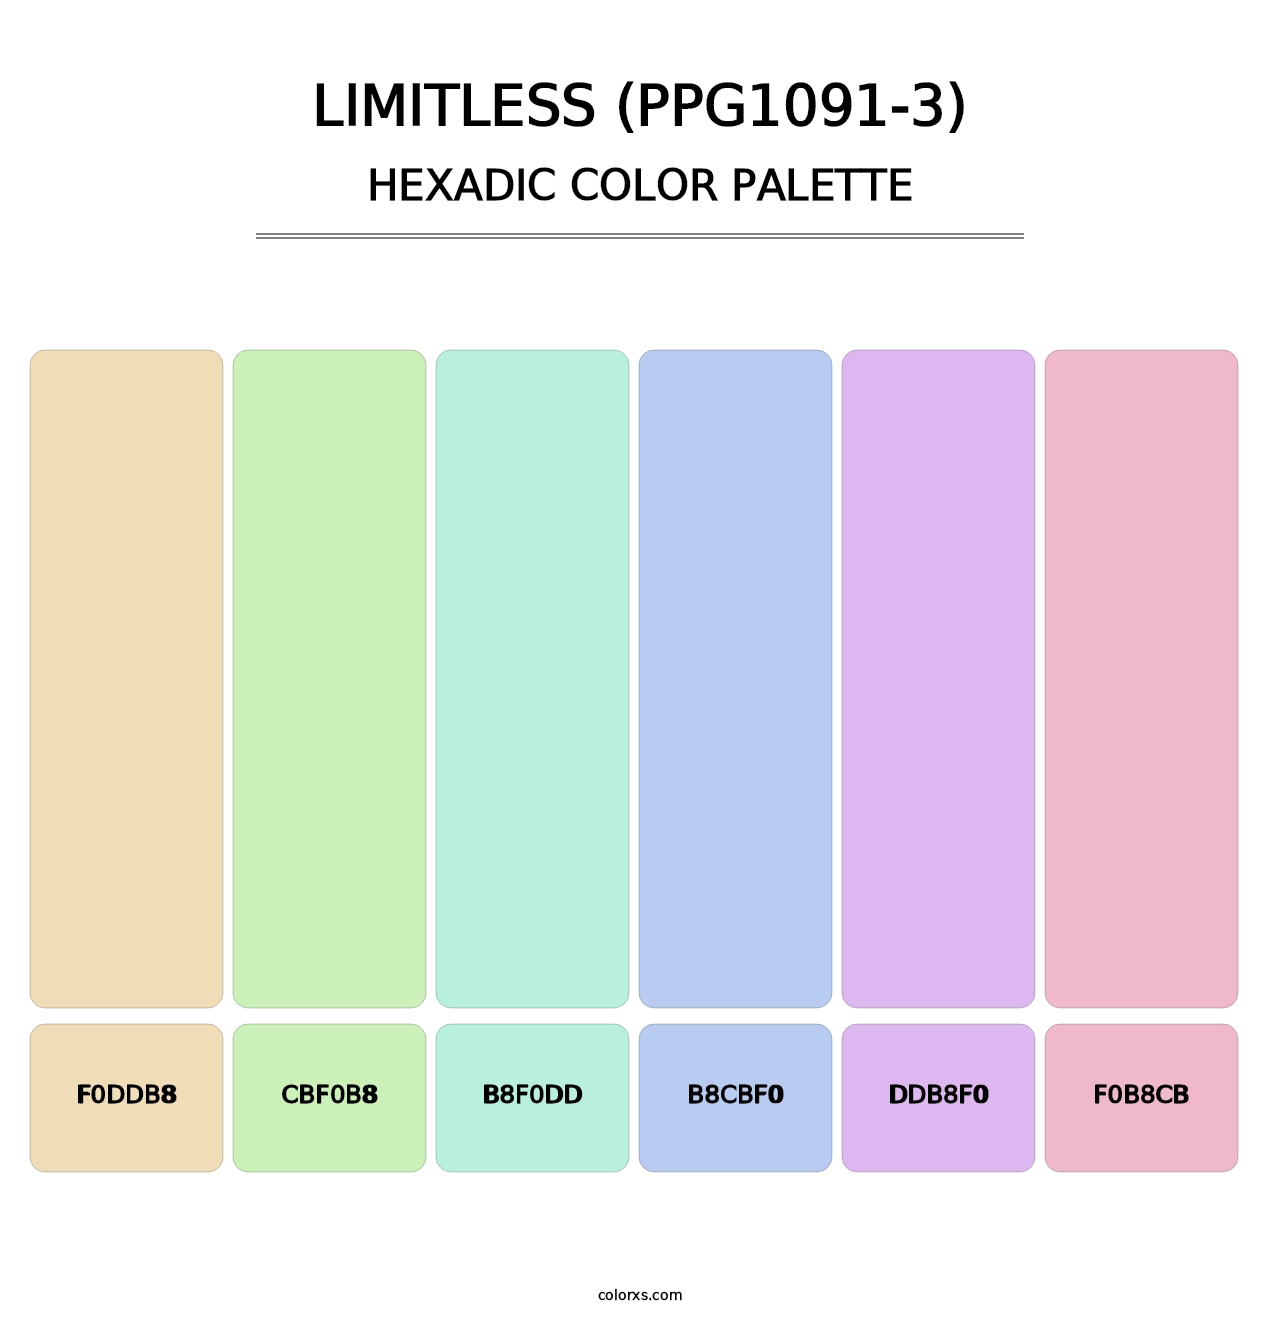 Limitless (PPG1091-3) - Hexadic Color Palette